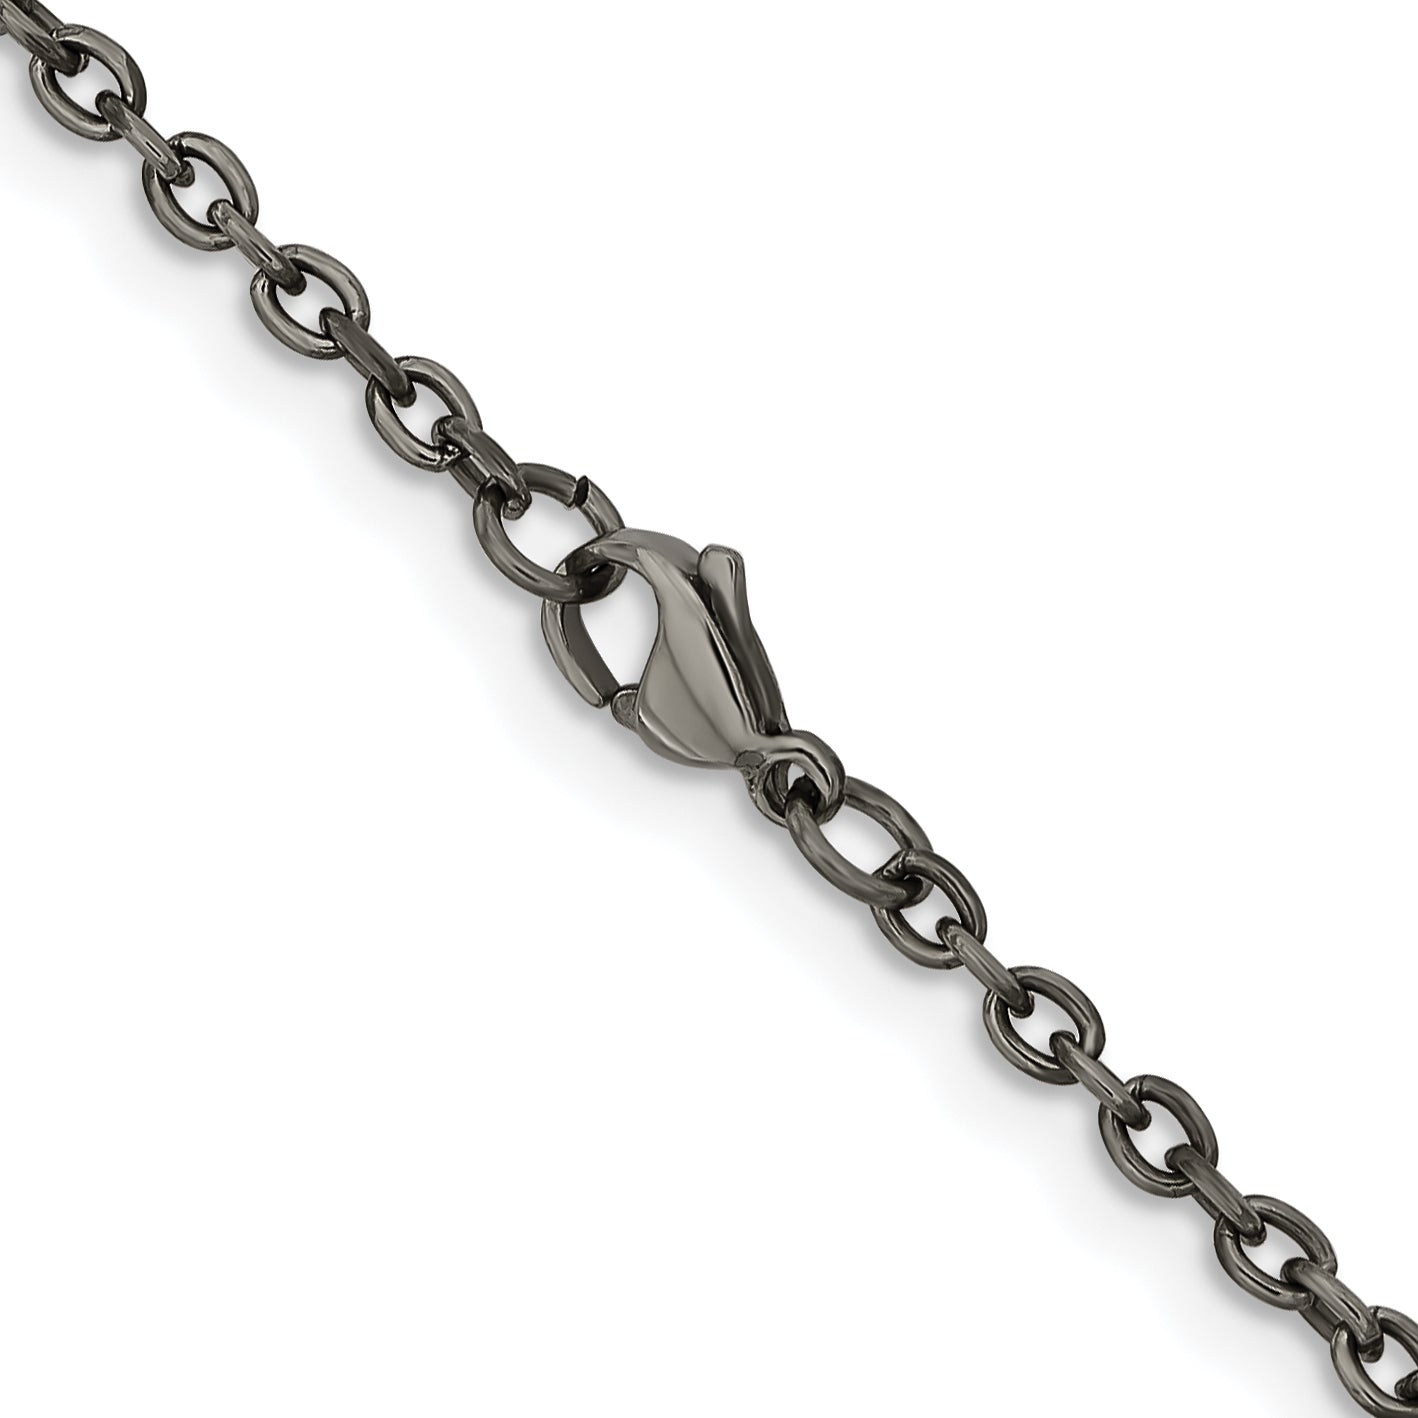 Chisel Titanium Polished 2.9mm 18 inch Cable Chain